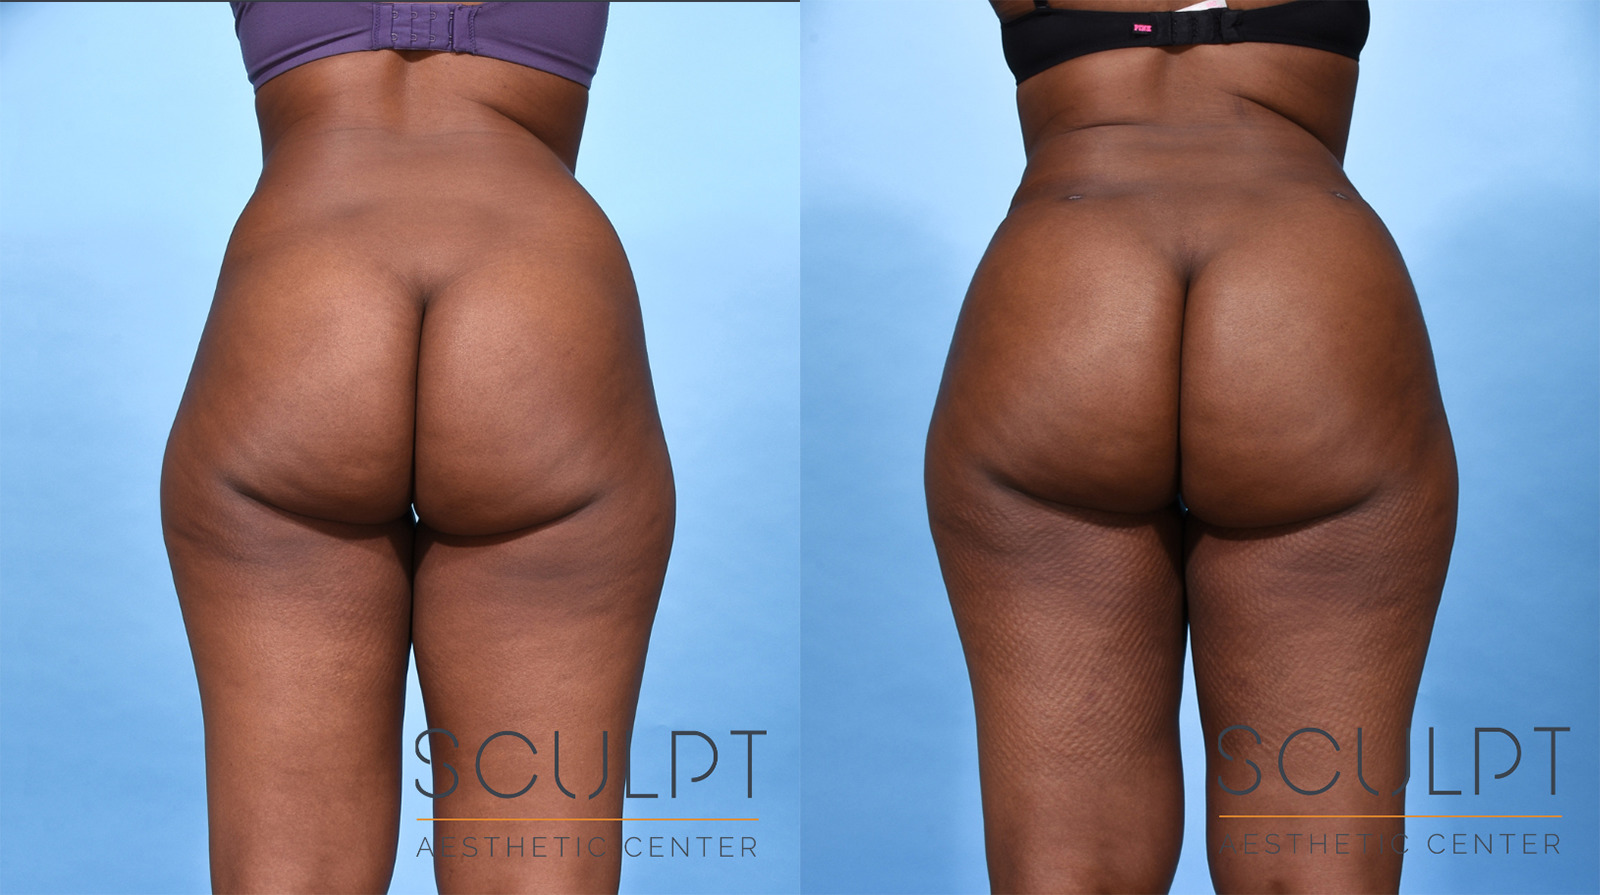 BBL(Brazilian Butt Lift) Before and After Photo by Sculpt Aesthetic Center in Frisco, TX